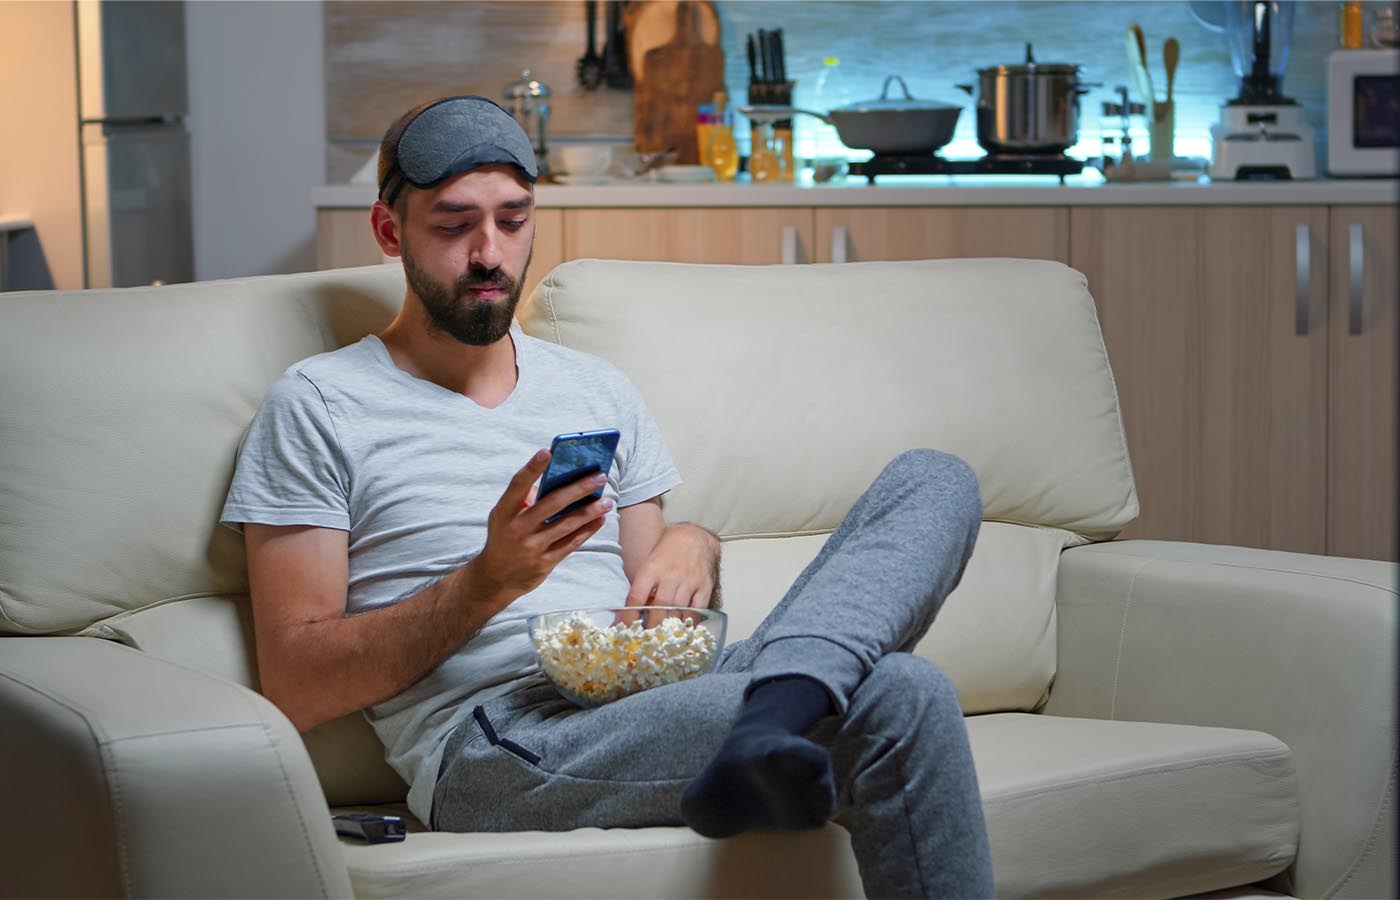 A young man sitting on the couch eating popcorn